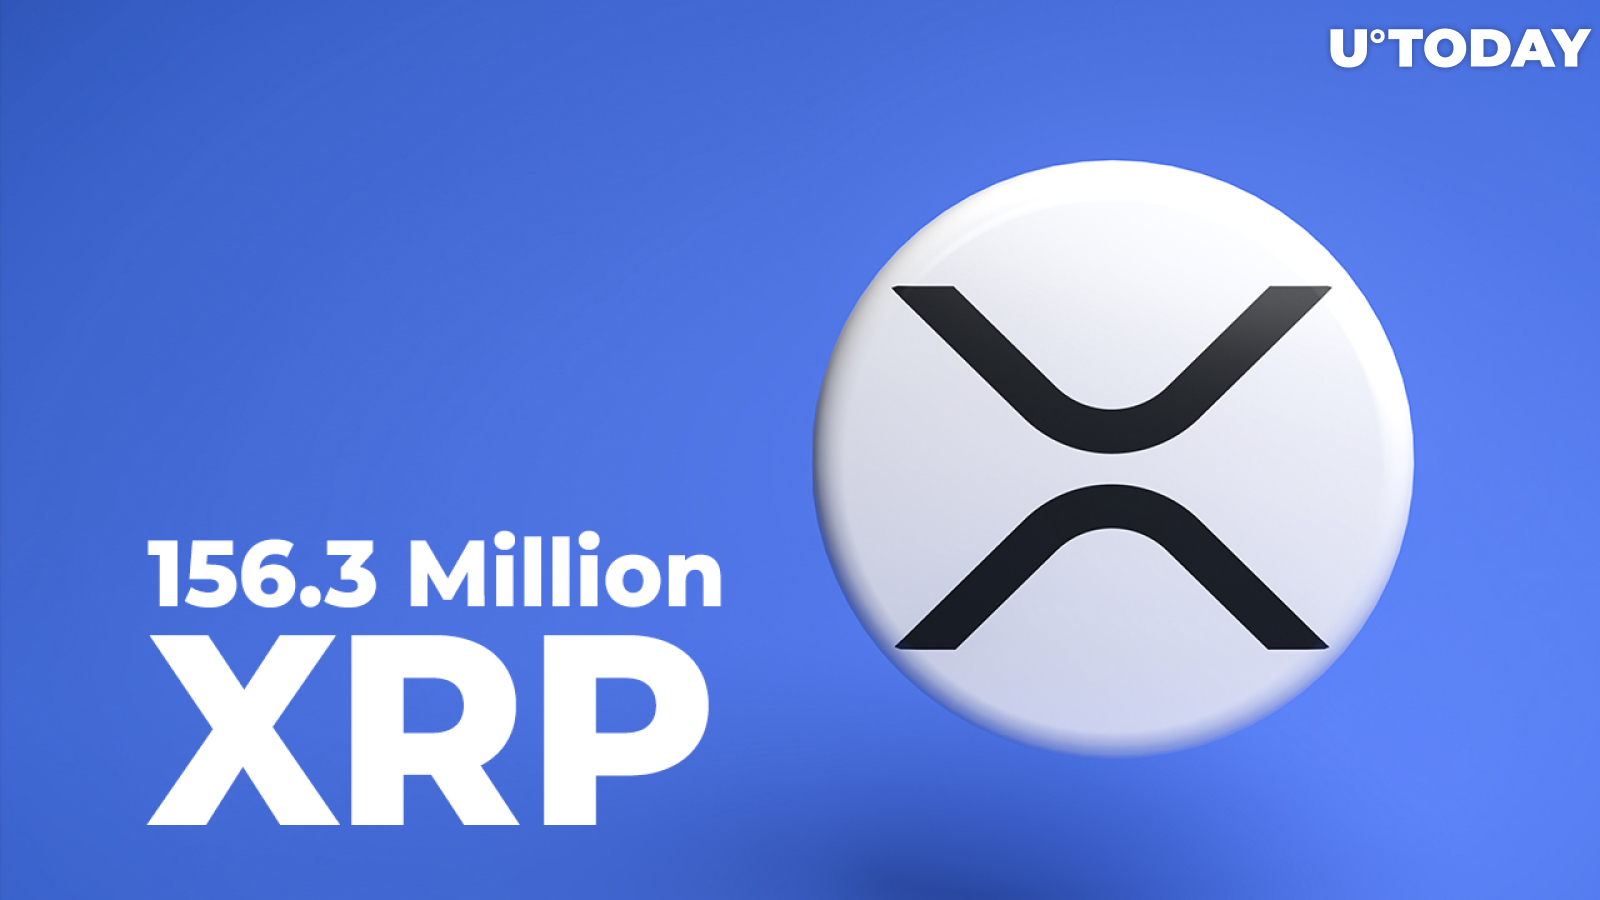 Ripple Helps Shovel 156.3 Million XRP As Coin Rises 6%